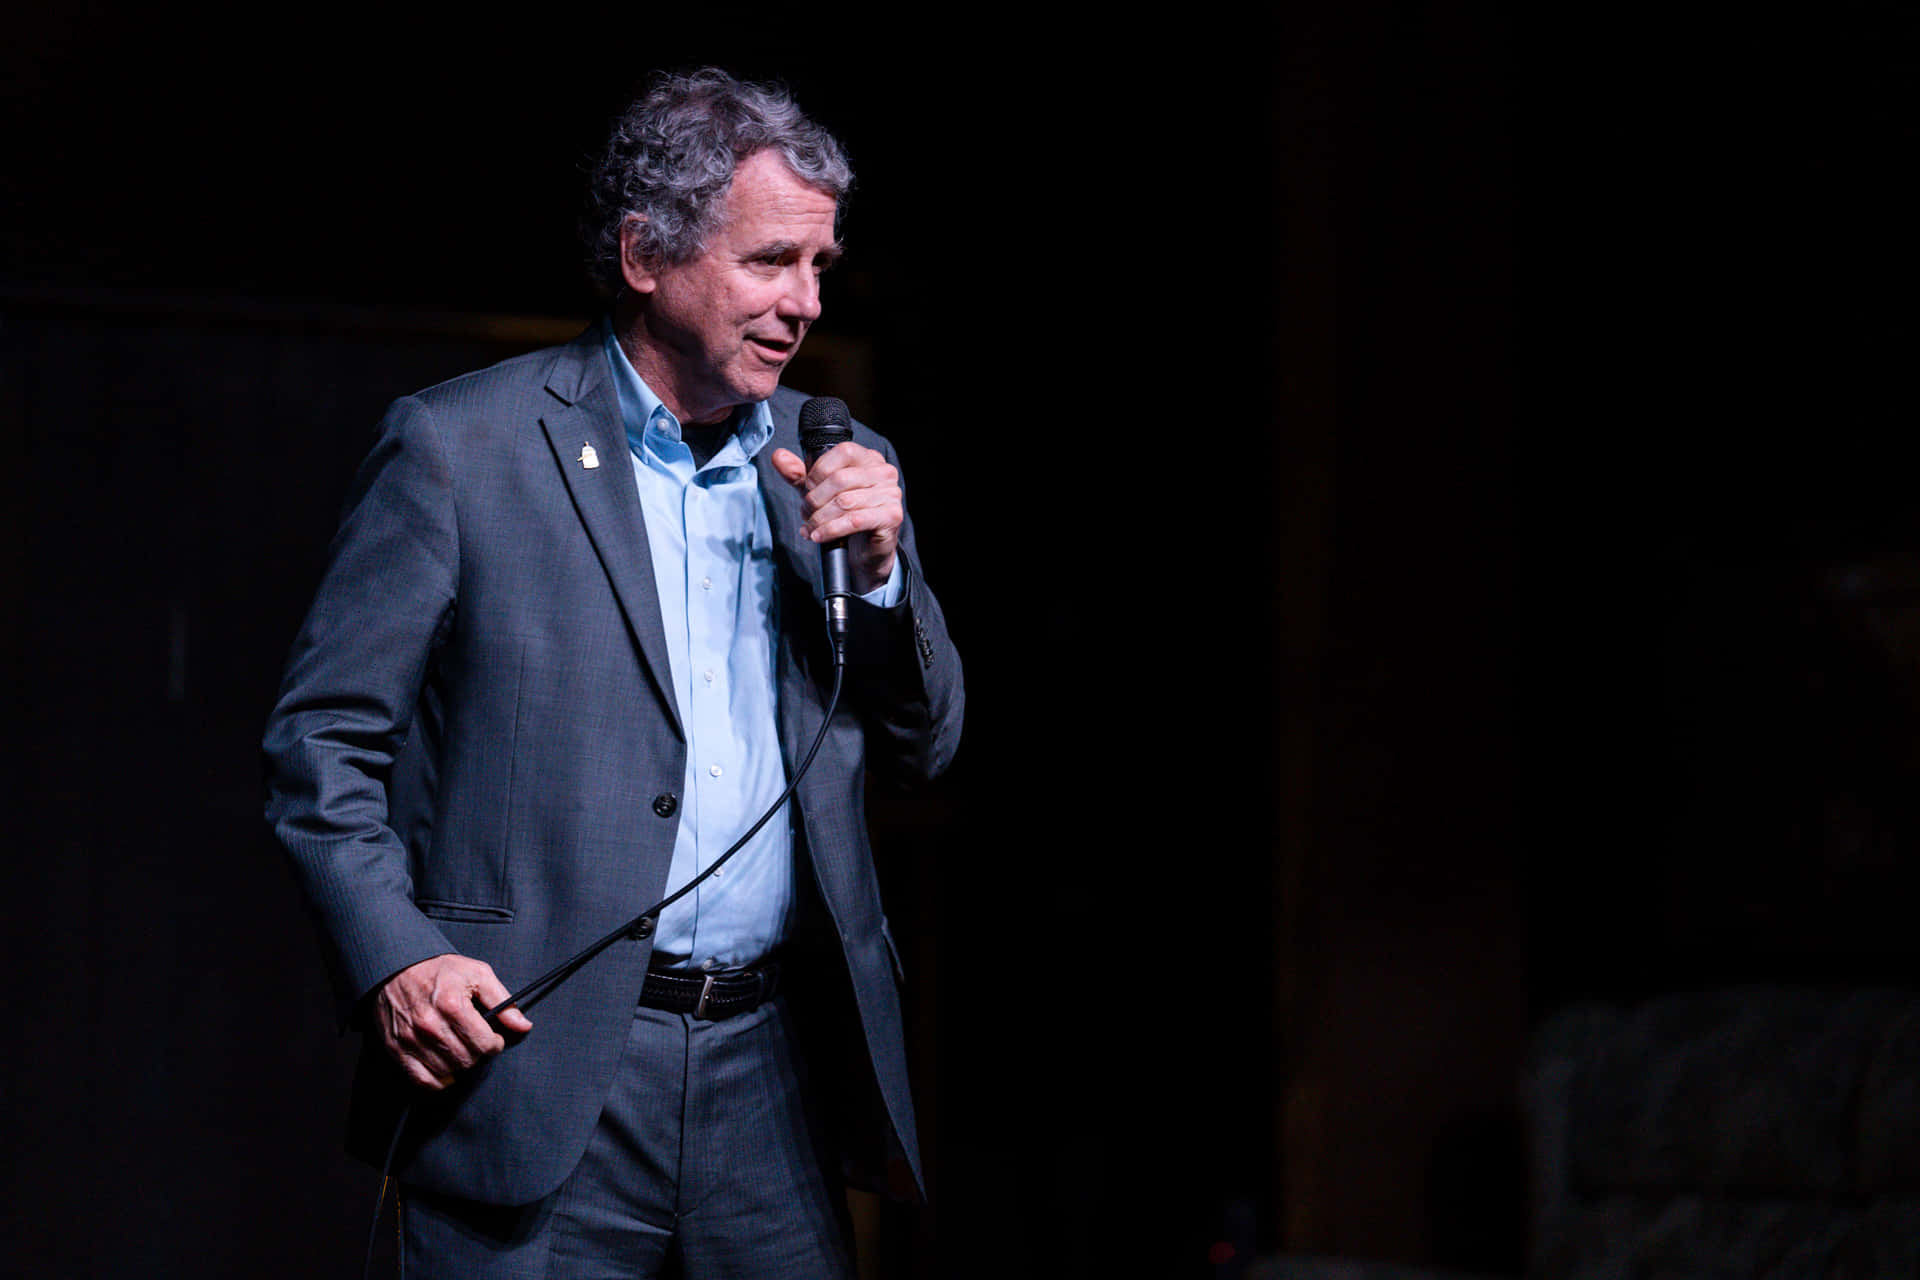 Sherrod Brown addressing the public with a wired microphone. Wallpaper